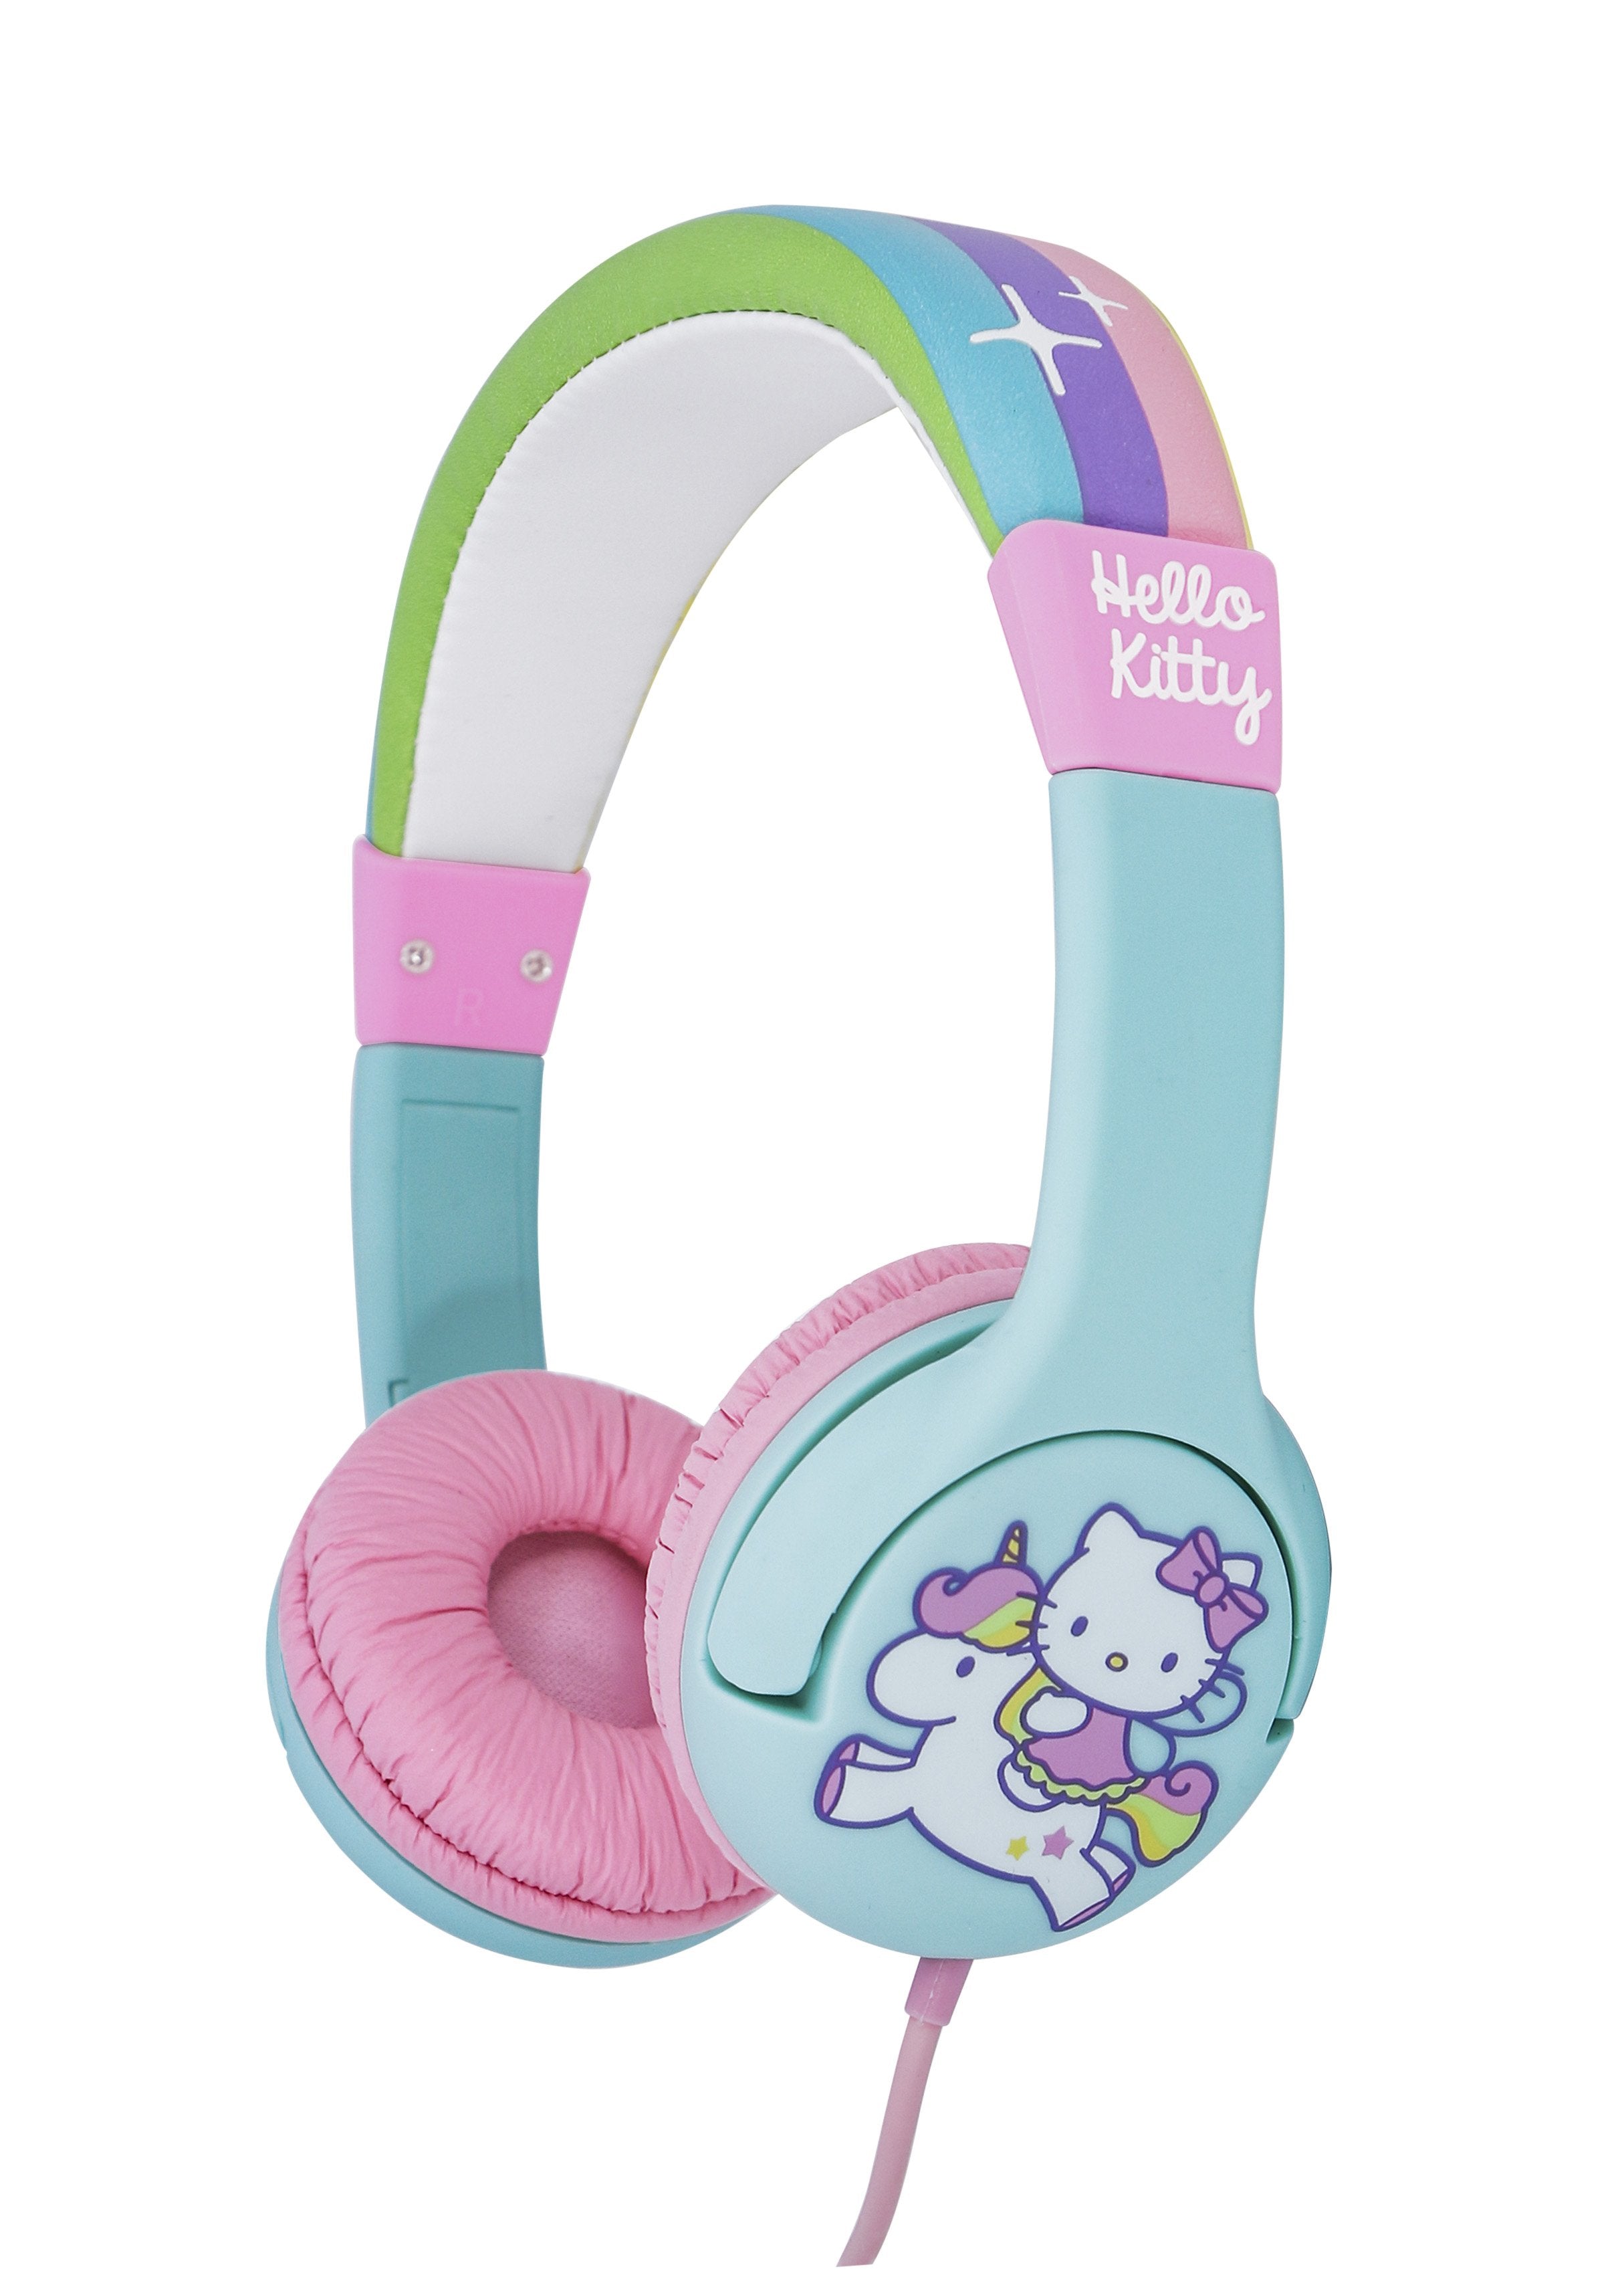 OTL HelloKitty OnEar Wired Headphone - Safe Volume Limiting @85dB, Foldable & Adjustable, Superb Quality,  Works w/ Smartphones, Tablets, Ninetendo Switch, Laptops & devices w/ 3.5mm port - Unicorn